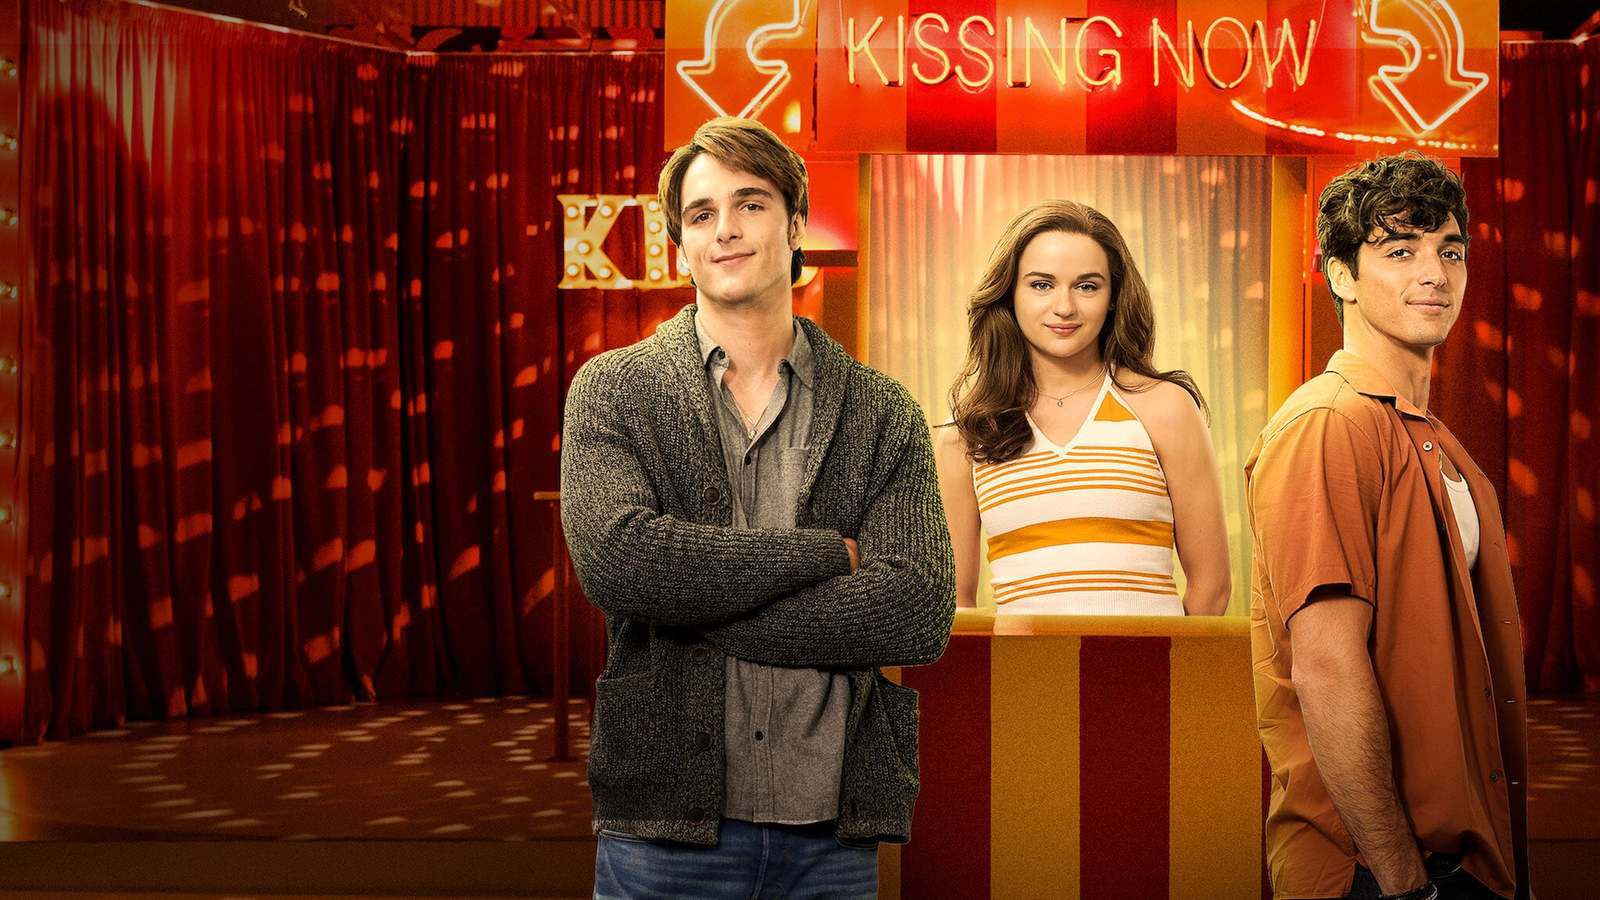 noah the kissing booth